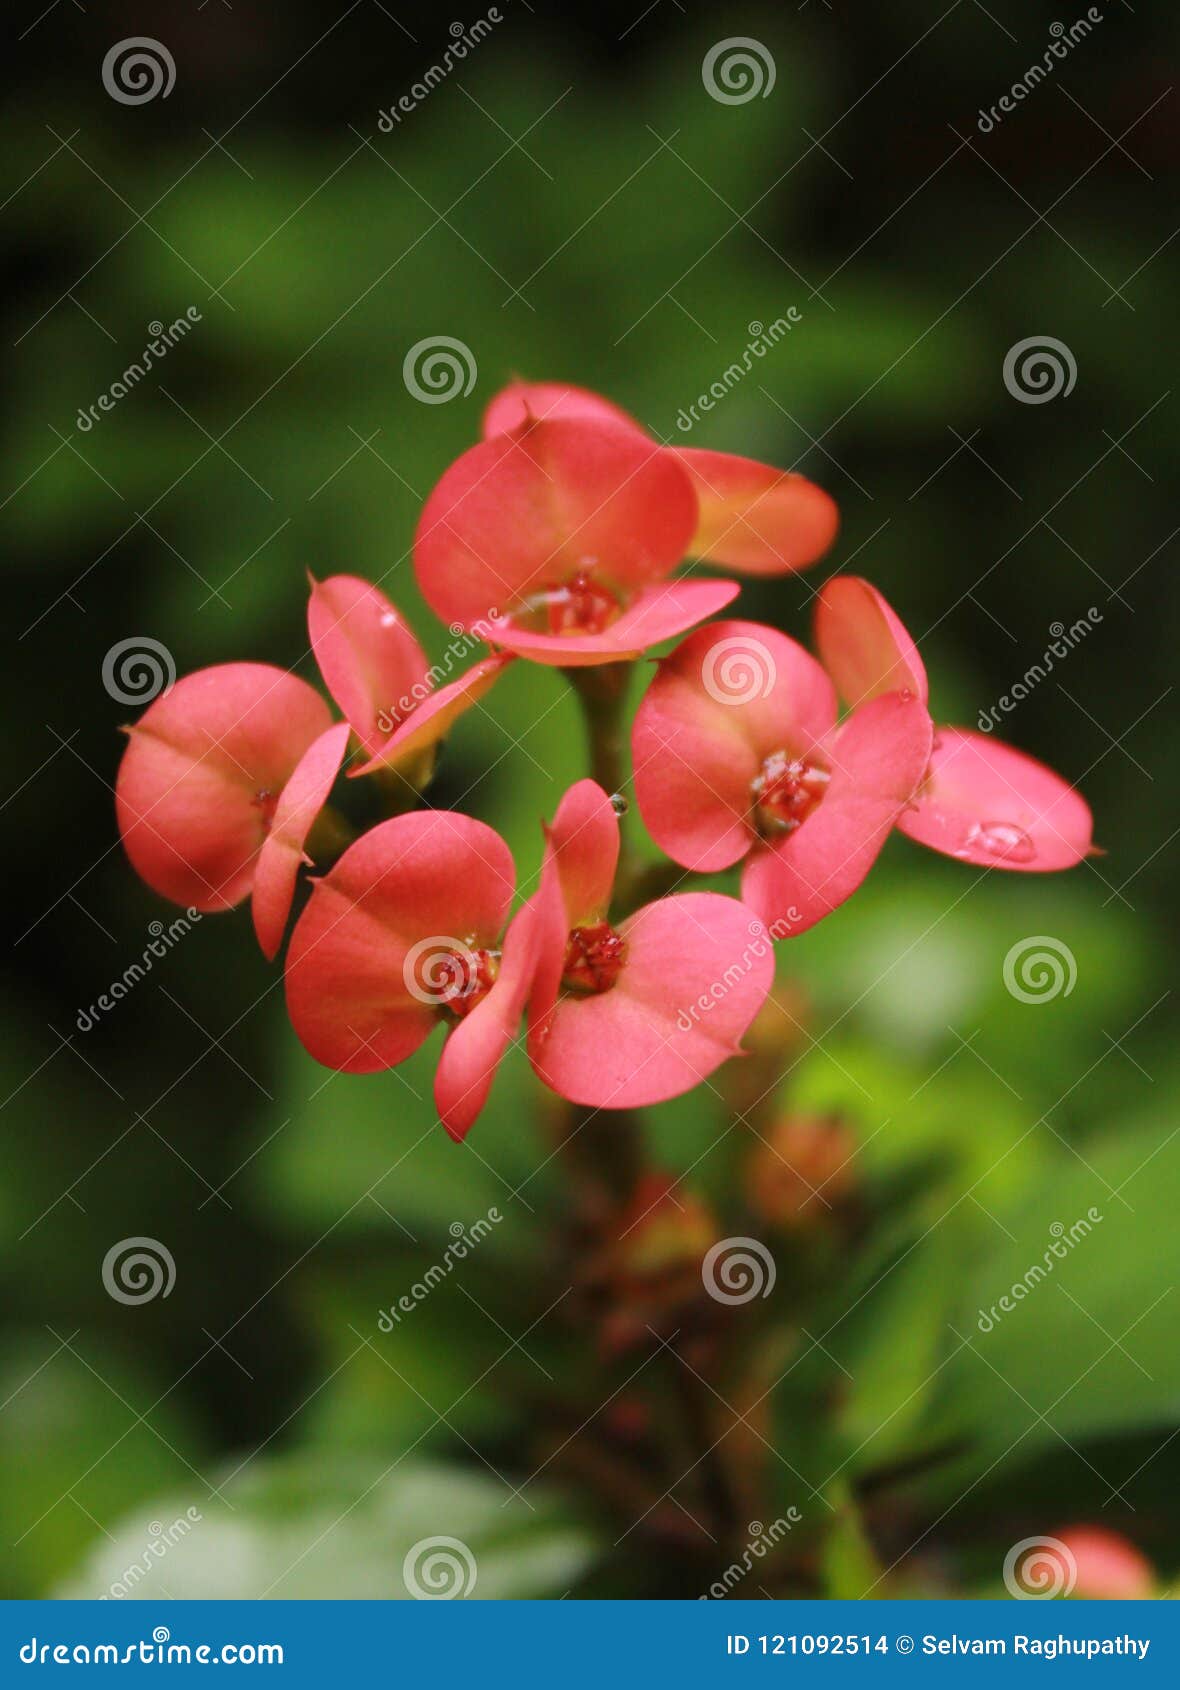 Red Flowers With Green Background In The Bryant Park Kodaikanal Stock Photo Image Of City Beautiful 121092514